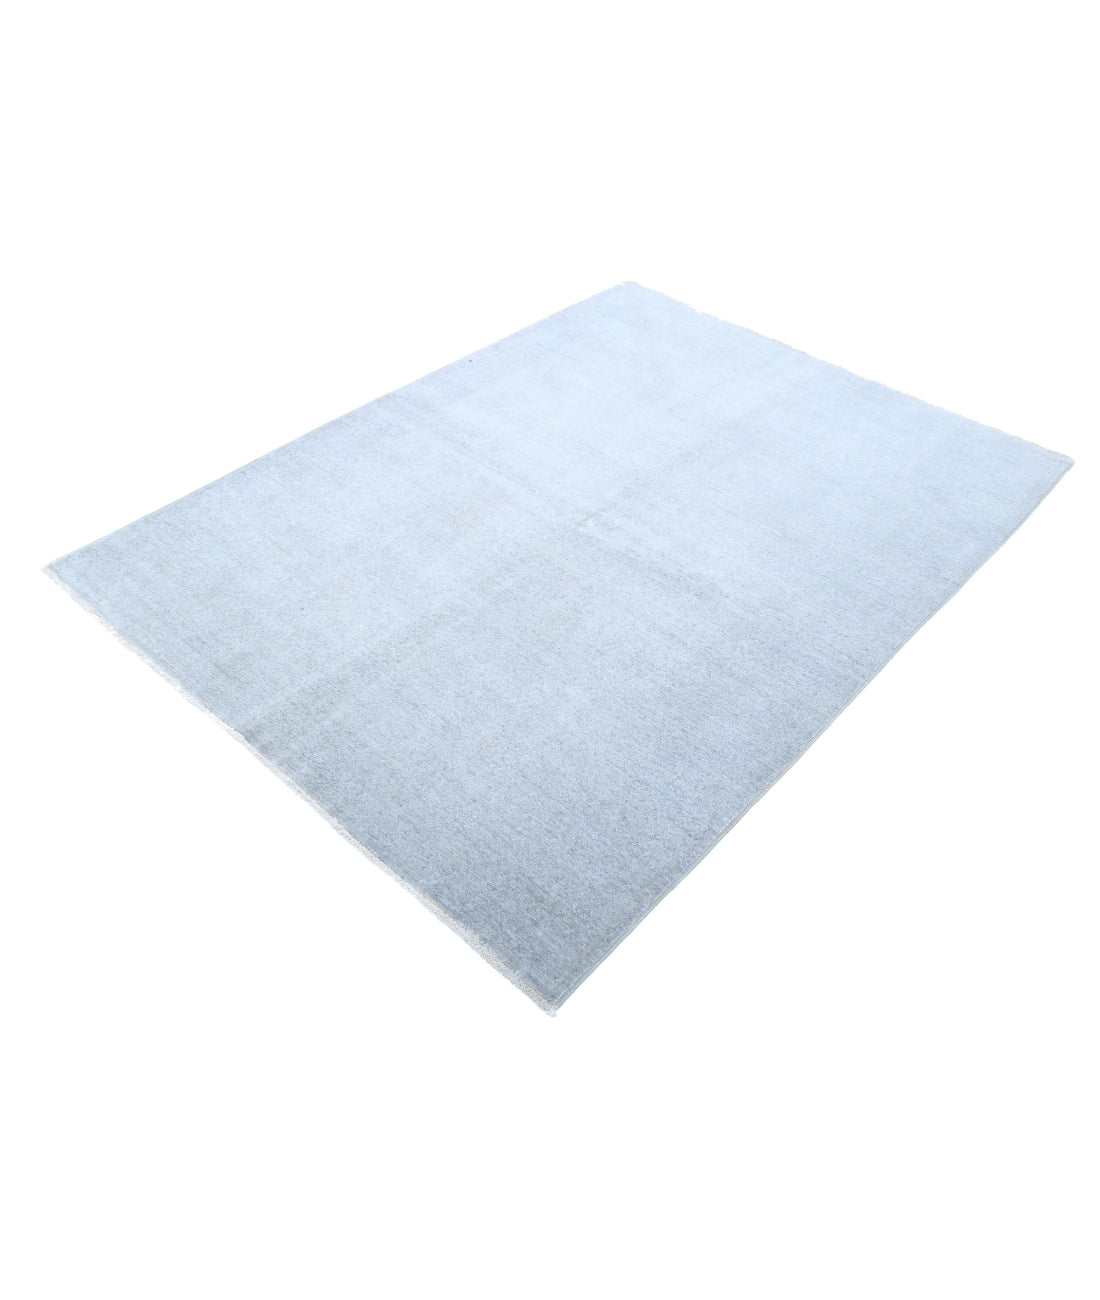 Overdye 4'8'' X 6'4'' Hand-Knotted Wool Rug 4'8'' x 6'4'' (140 X 190) / Grey / N/A